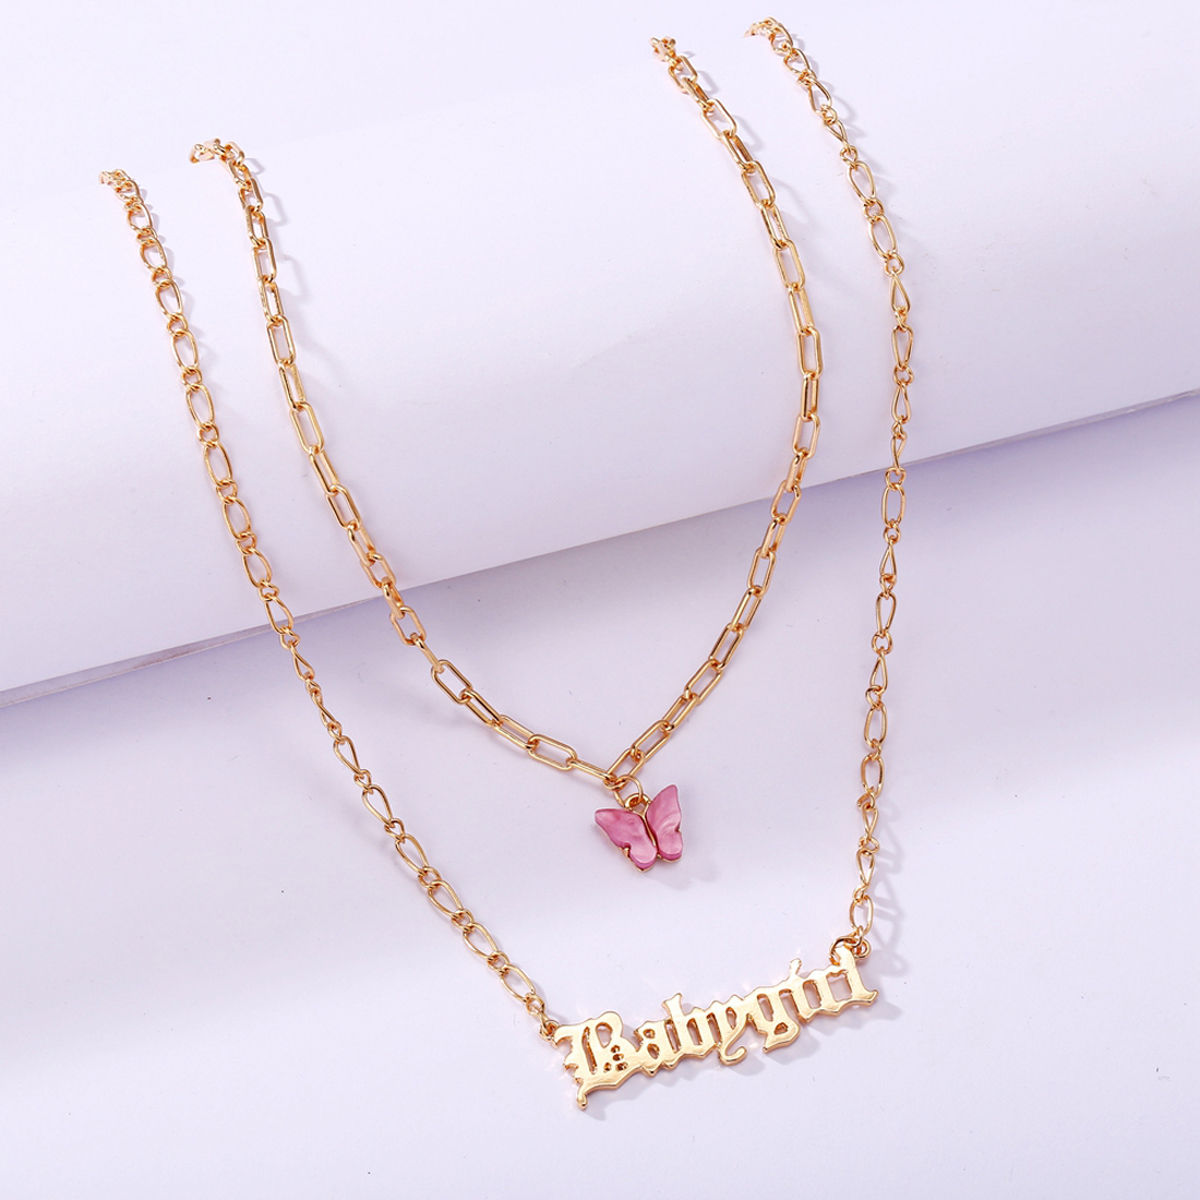 Babygirl Name Necklace – Dainty and gold jewelry